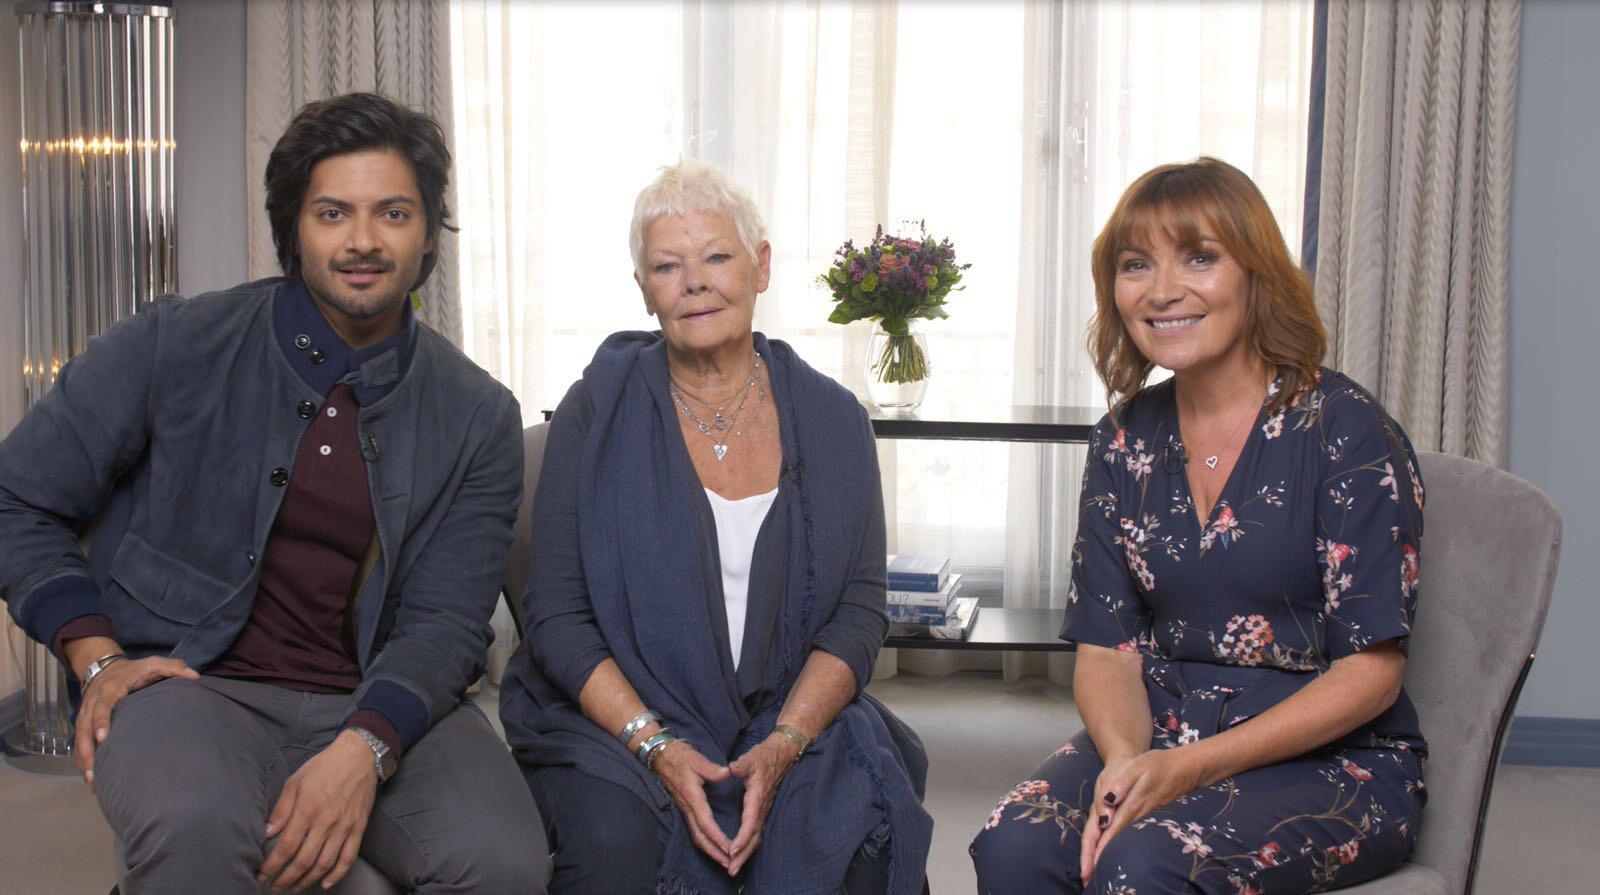 Lorraine had a rare time last week meeting the stars of Victoria And Abdul, Ali Fazal and Dame Judi Dench